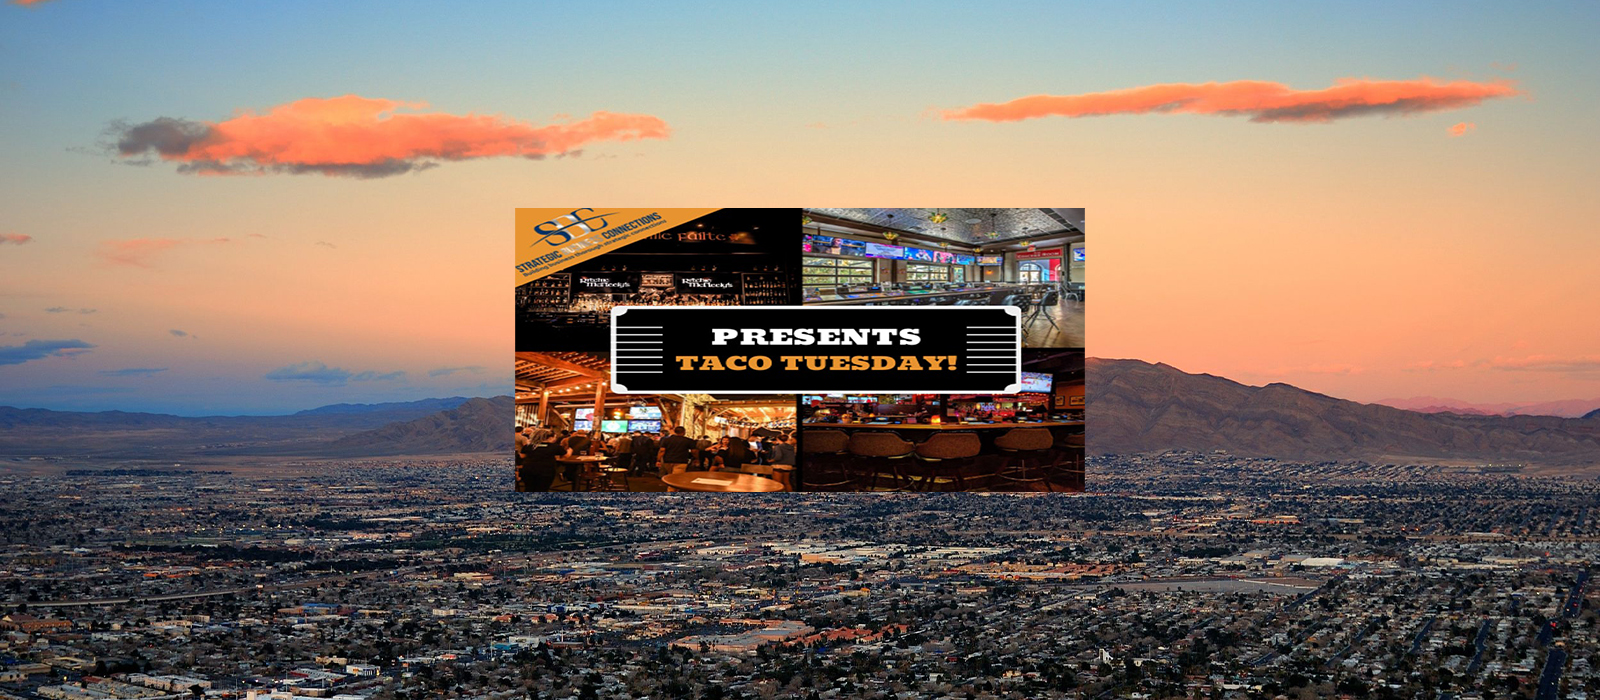 Nevada Bussiness taco tuesday banner